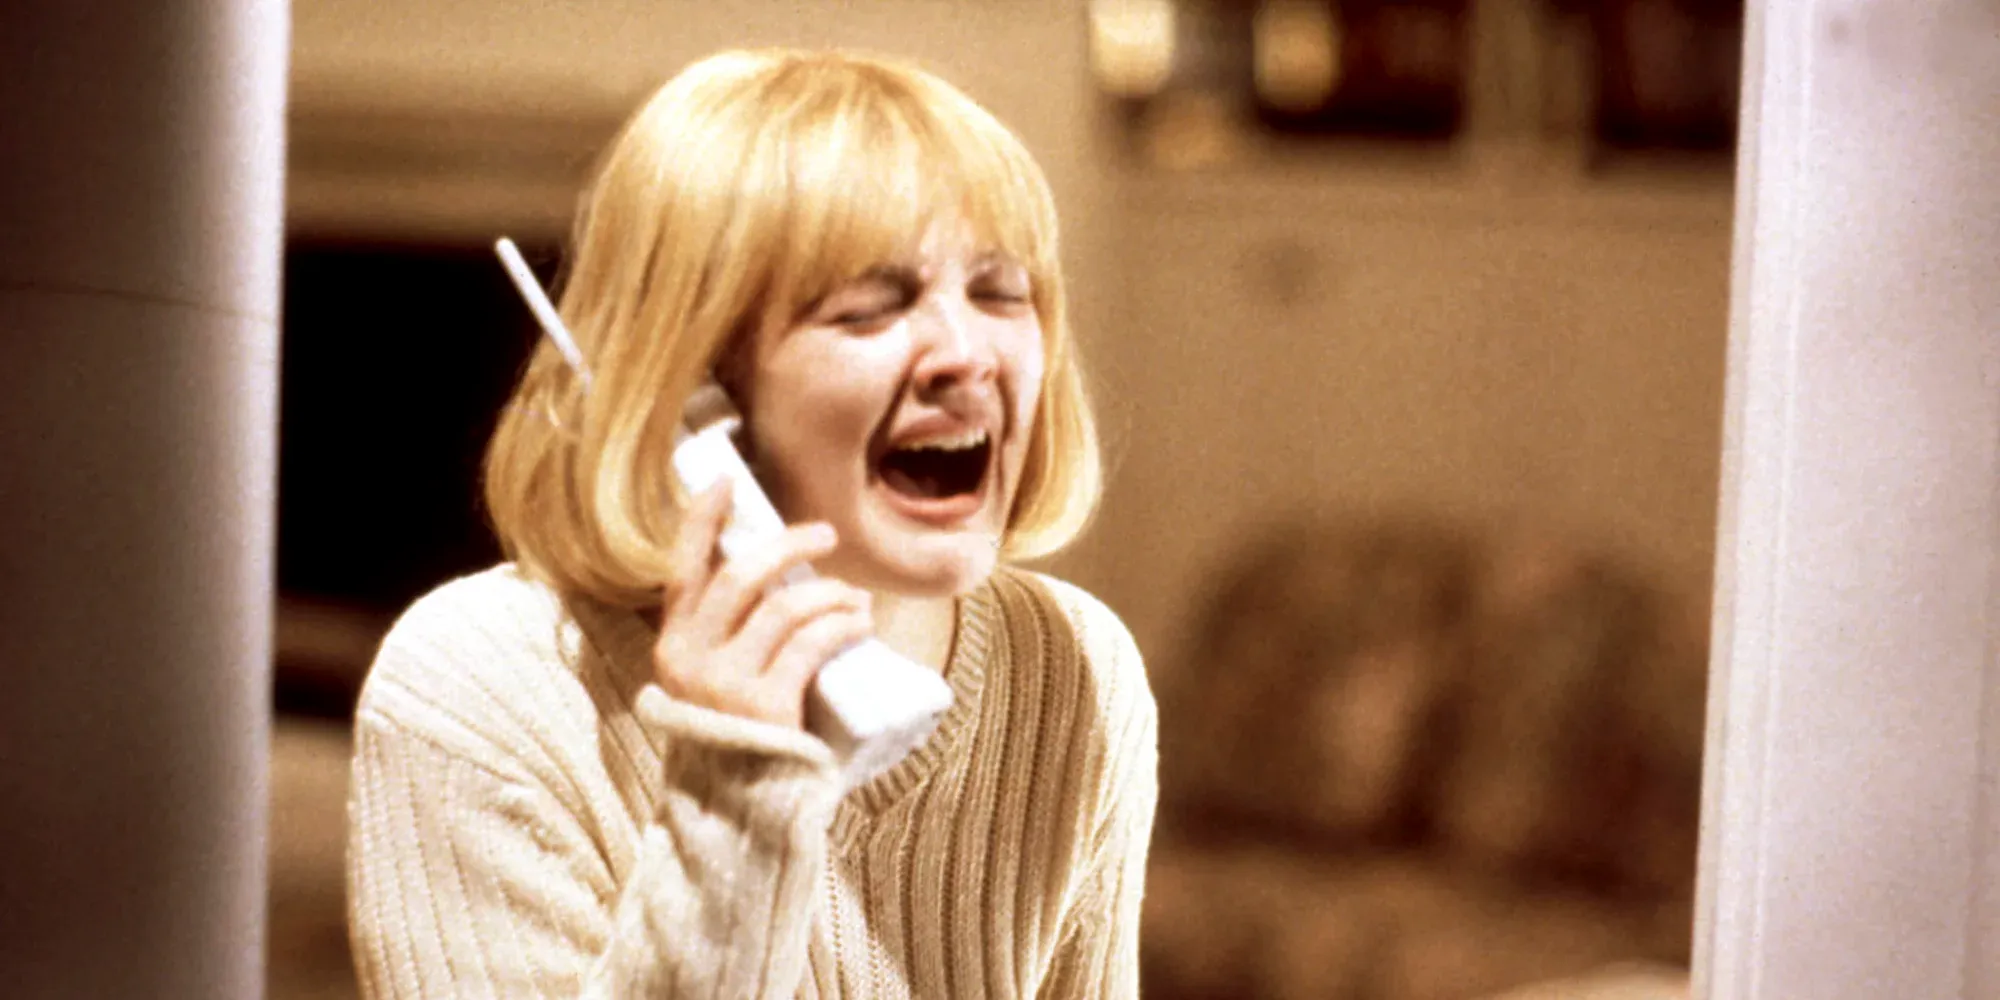 A teenager screaming on the phone